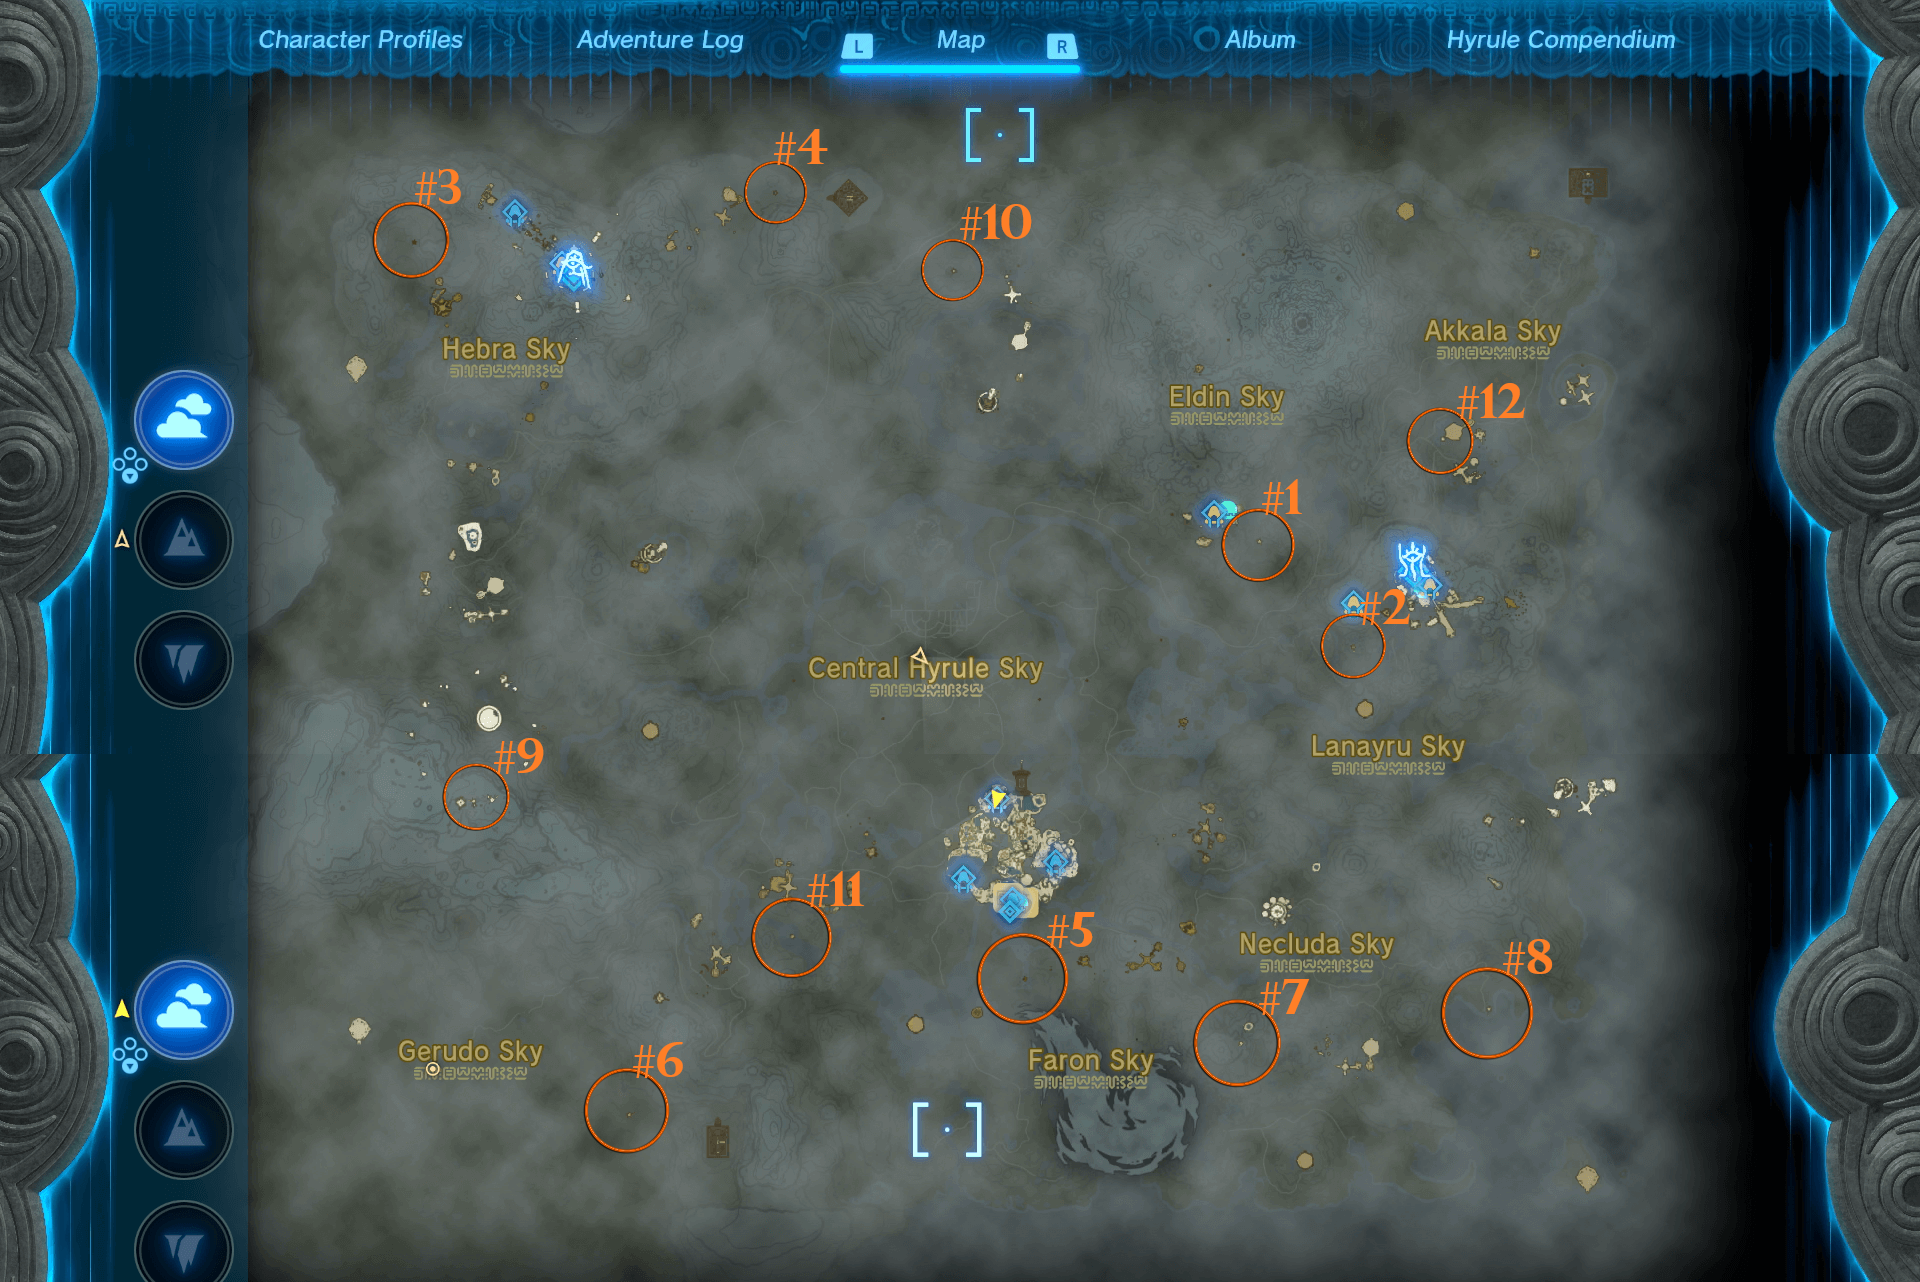 All tablet sky locations are marked with numbers